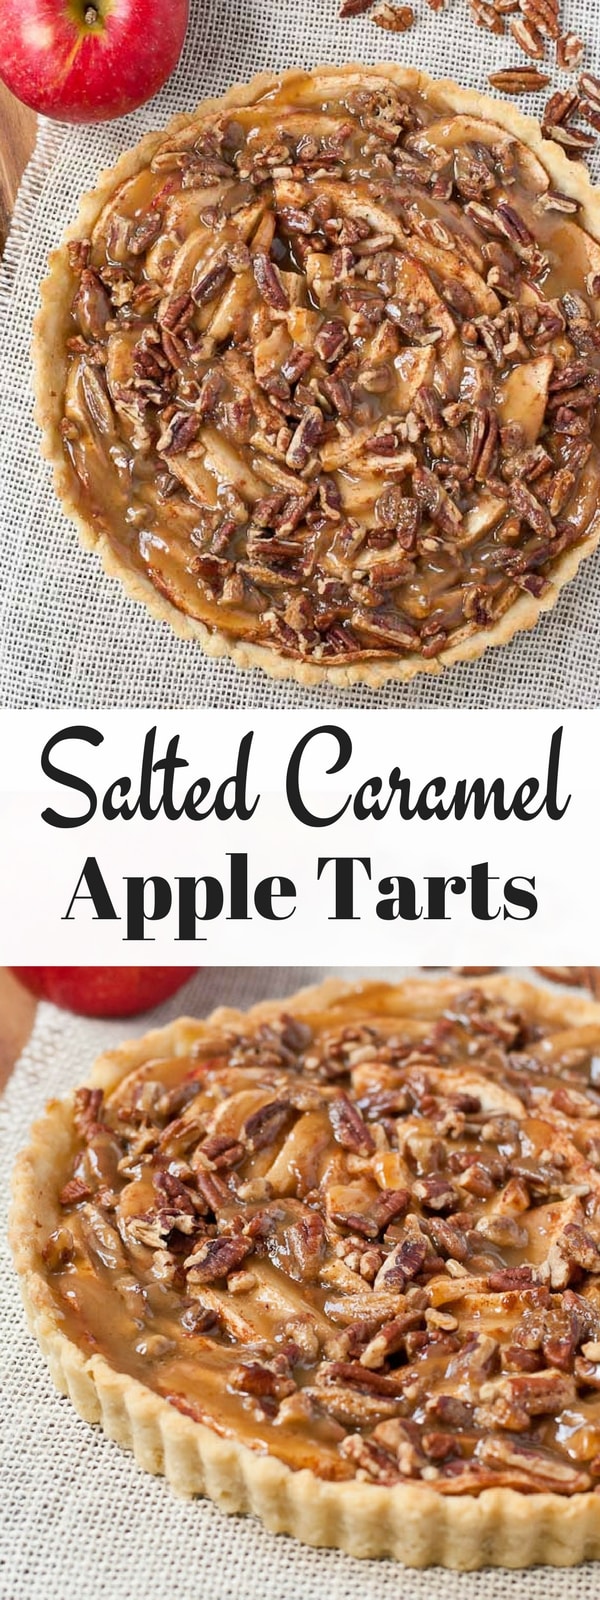 This Salted Caramel Apple Tart is outrageously delicious, and with an easy homemade crust recipe, it comes together quickly!